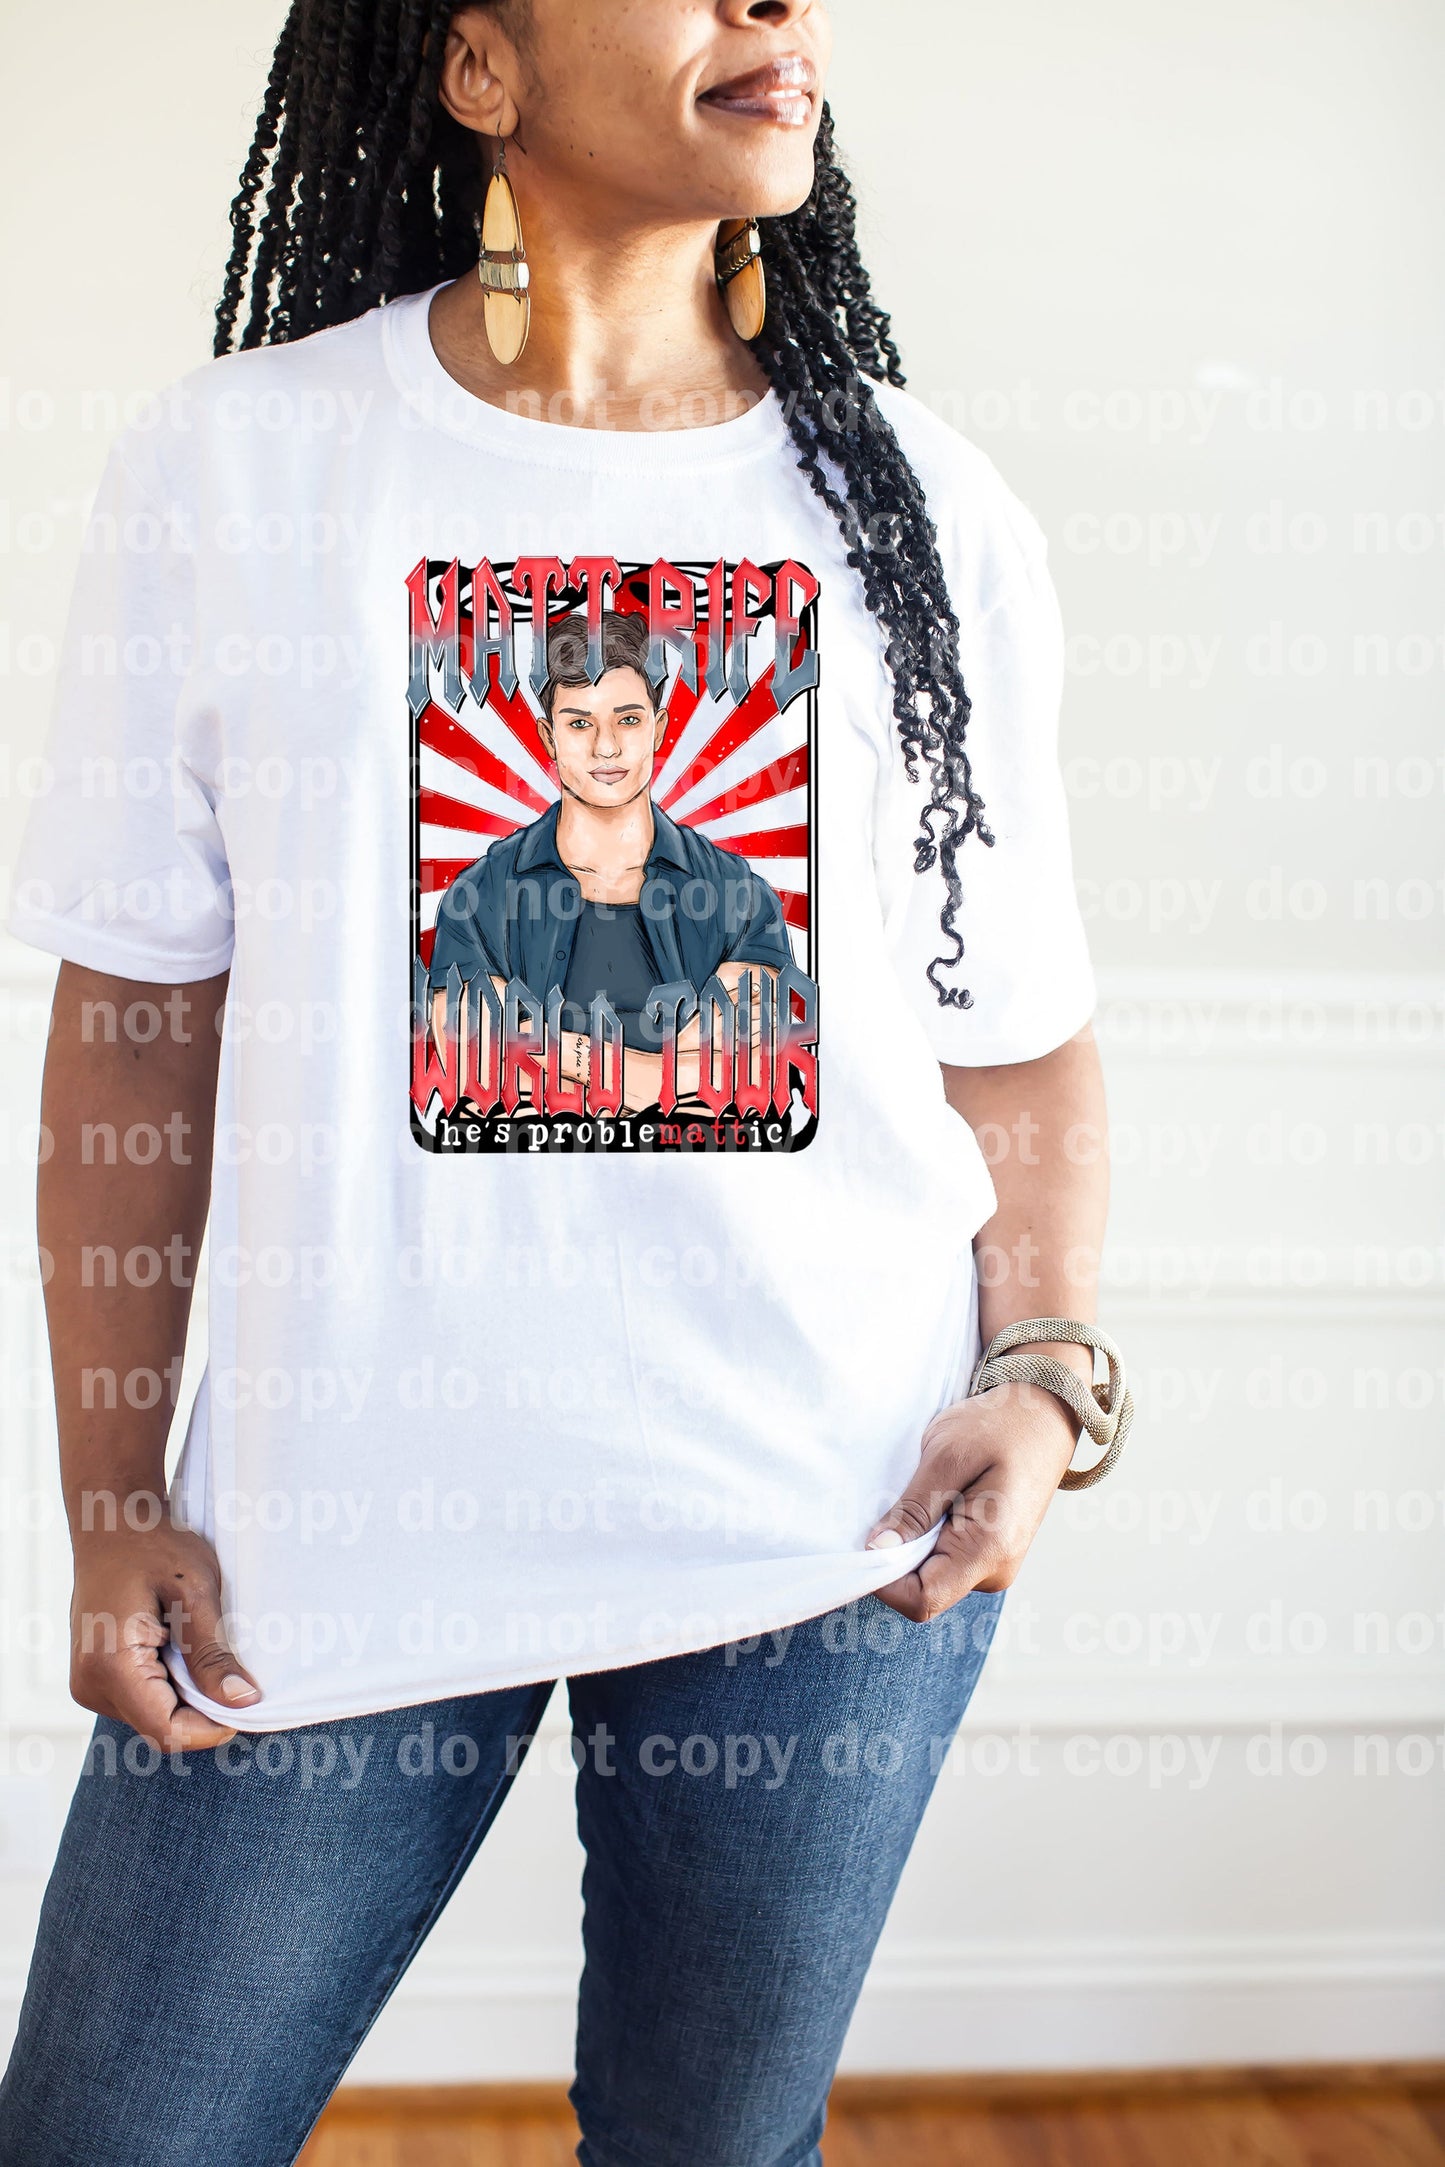 Mr World Tour He's Problematic with Pocket Option Dream Print or Sublimation Print